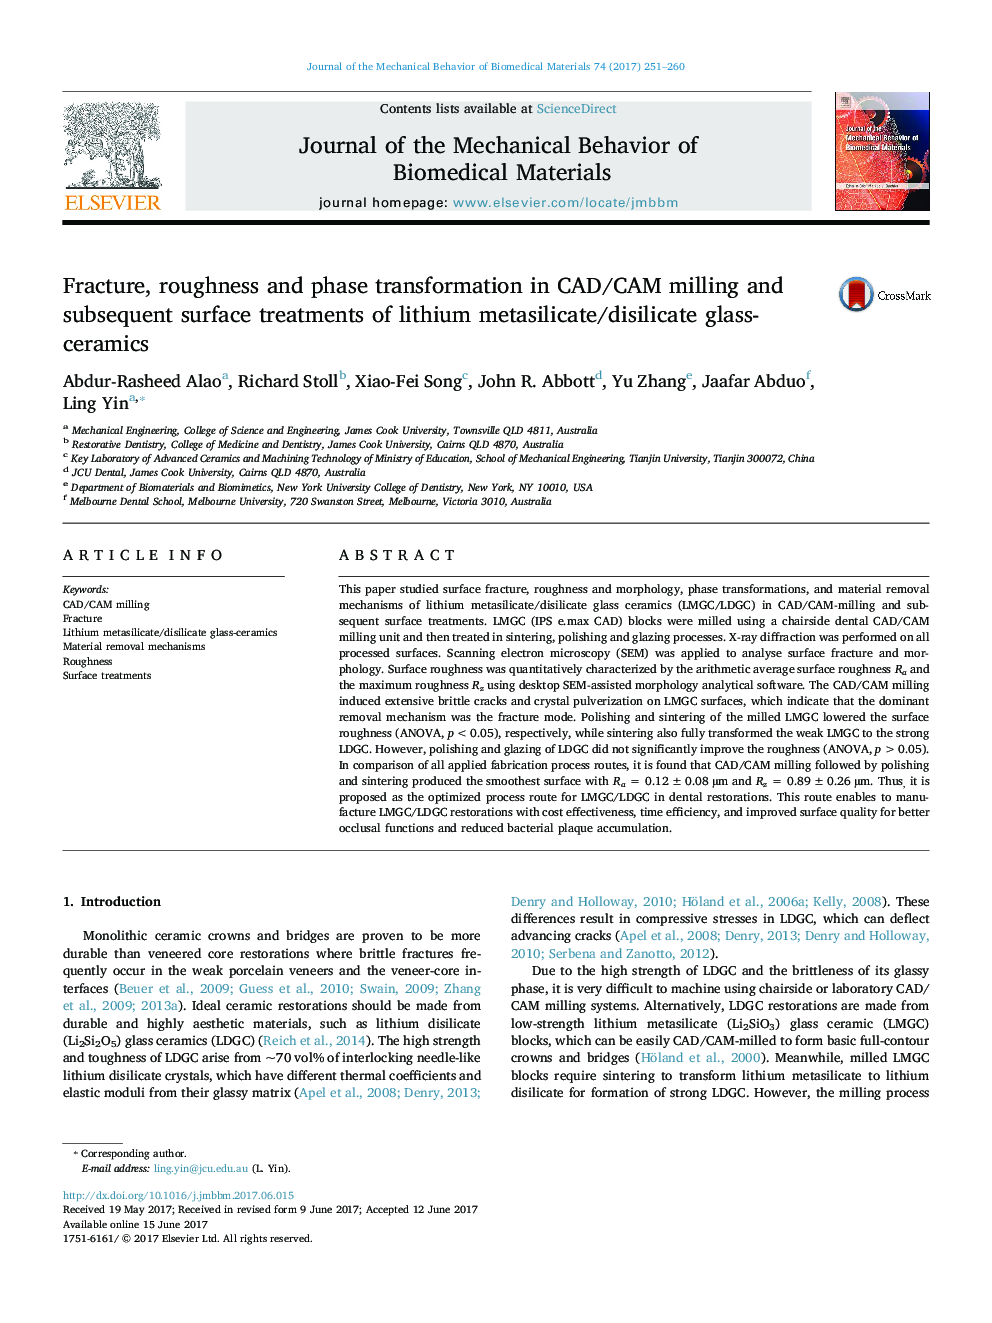 Fracture, roughness and phase transformation in CAD/CAM milling and subsequent surface treatments of lithium metasilicate/disilicate glass-ceramics